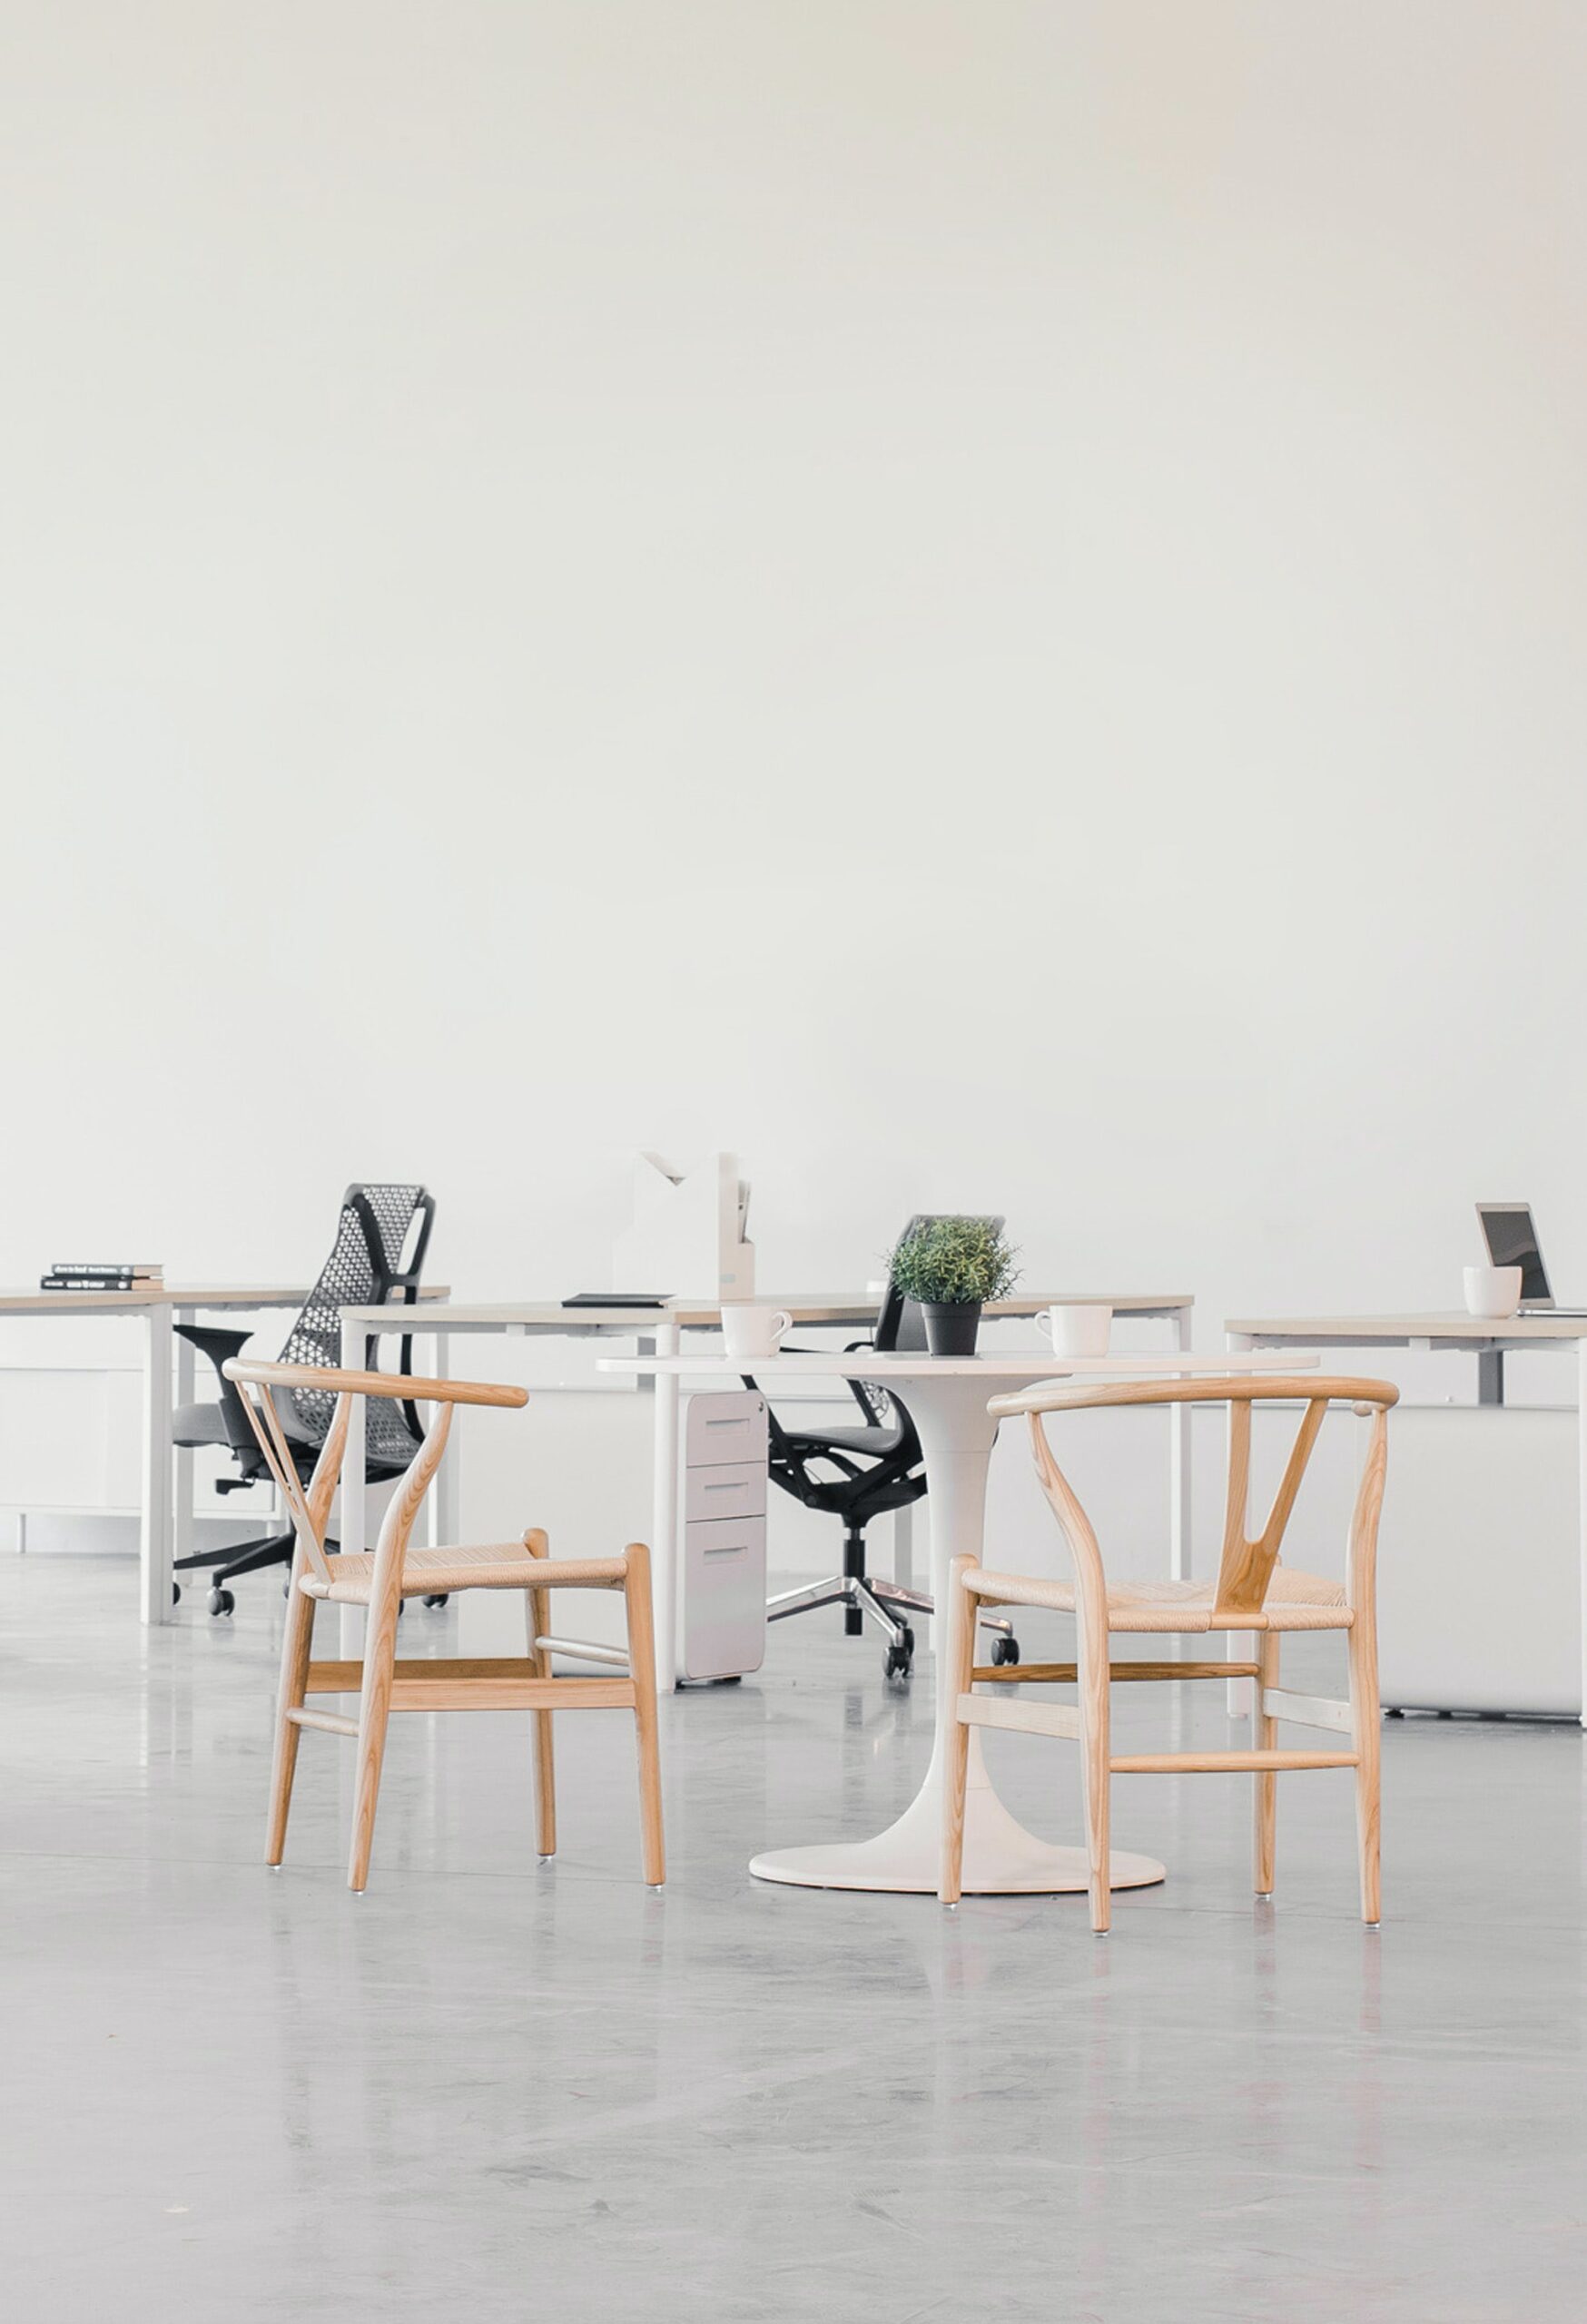 Article cover : Photo of desks and chairs in a White Office